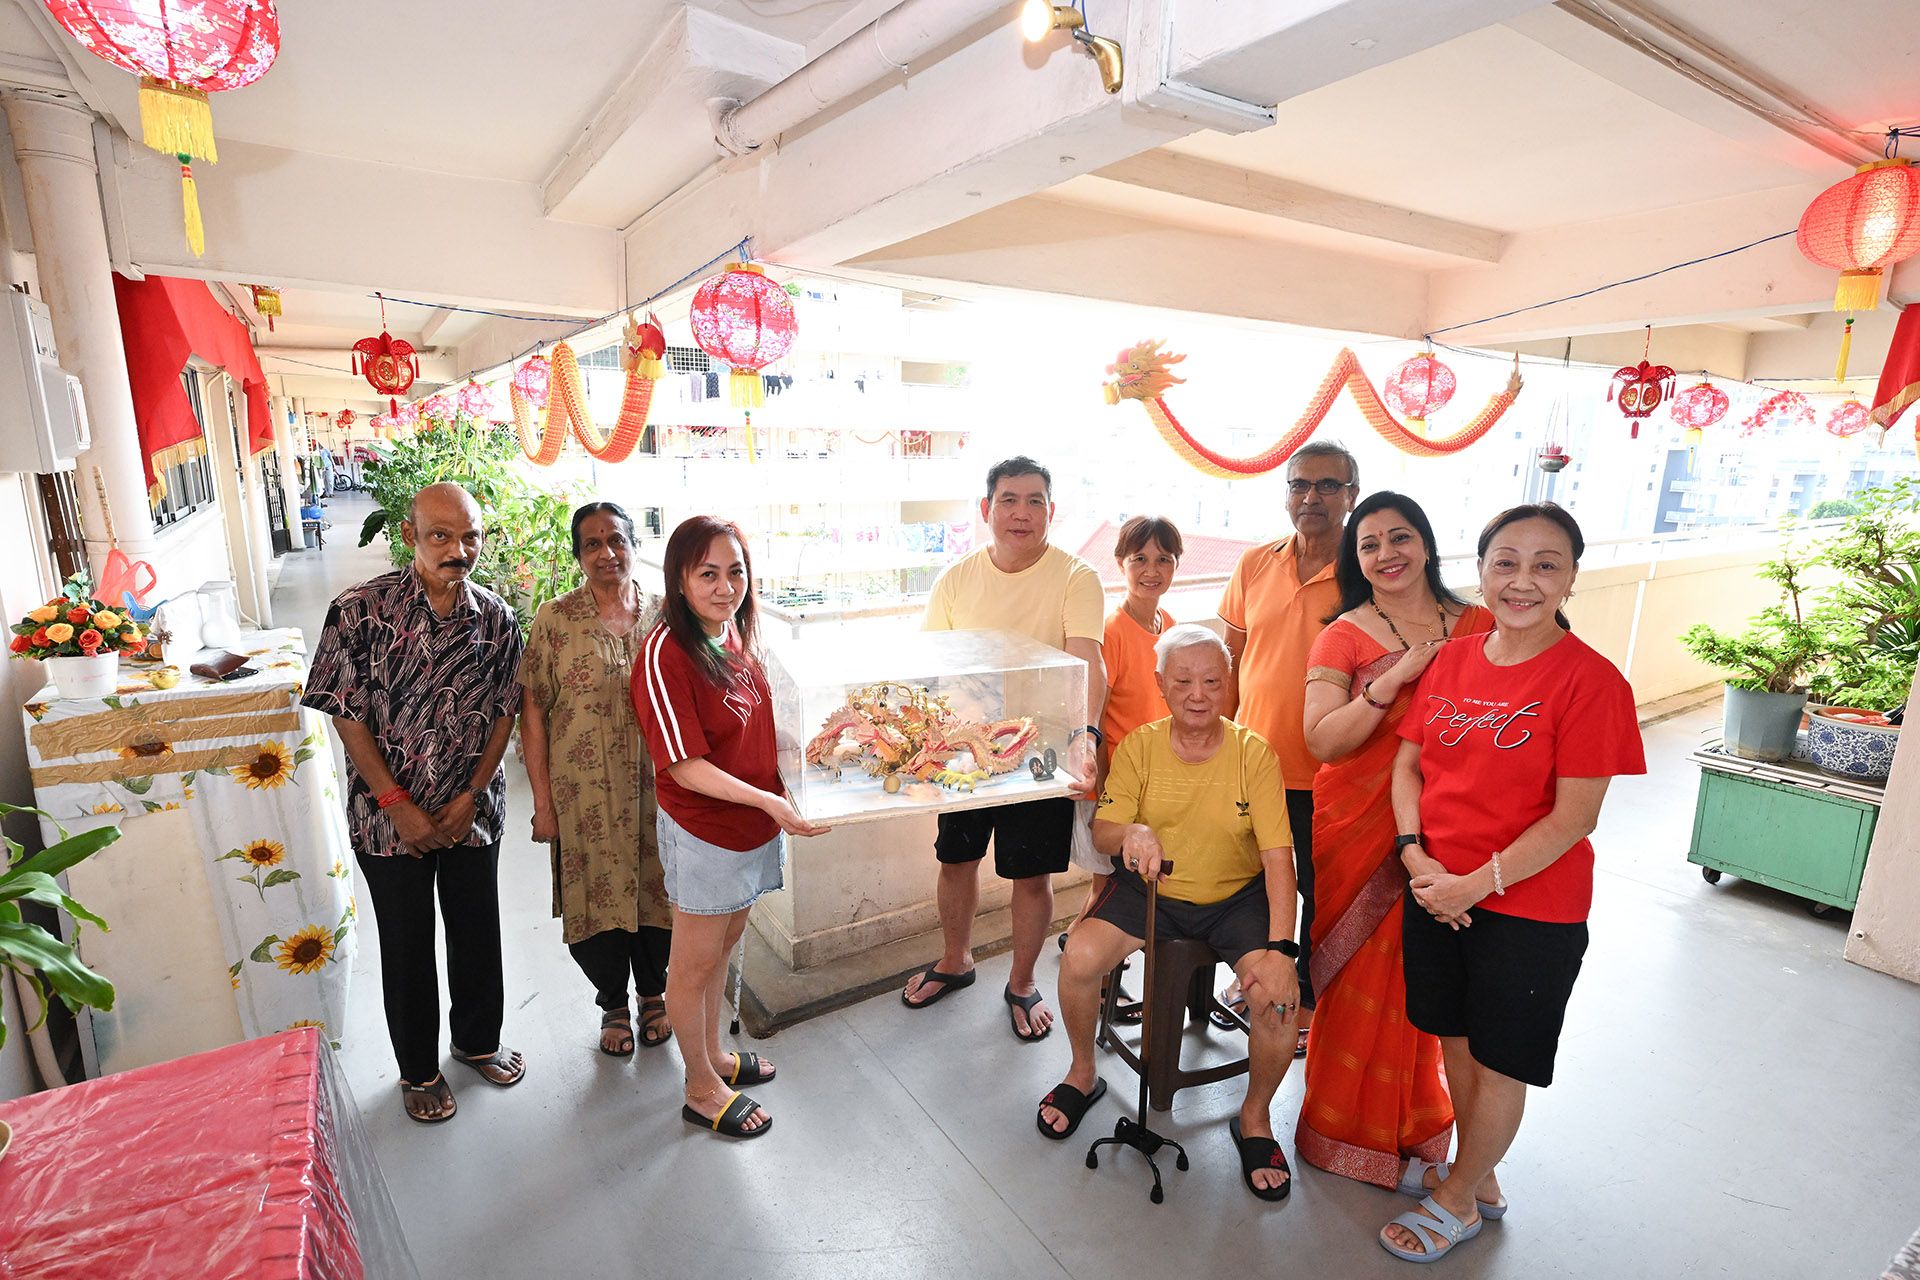 (From left) The long-time neighbours with their Chinese New Year decorations. Mr G. Manoharan, 69; Madam M. Letchini, 68; Madam Toh Siew Mue, 57; Mr Tan Chwee Beng, 61; Madam Tok Le Hiong, 61; Mr Ng Teck Min, 86; Mr Jujeet Singh, 68; Mrs Shobha Singh, 50; and Madam Tan Lee Hua, 65. ST PHOTO: LIM YAOHUI